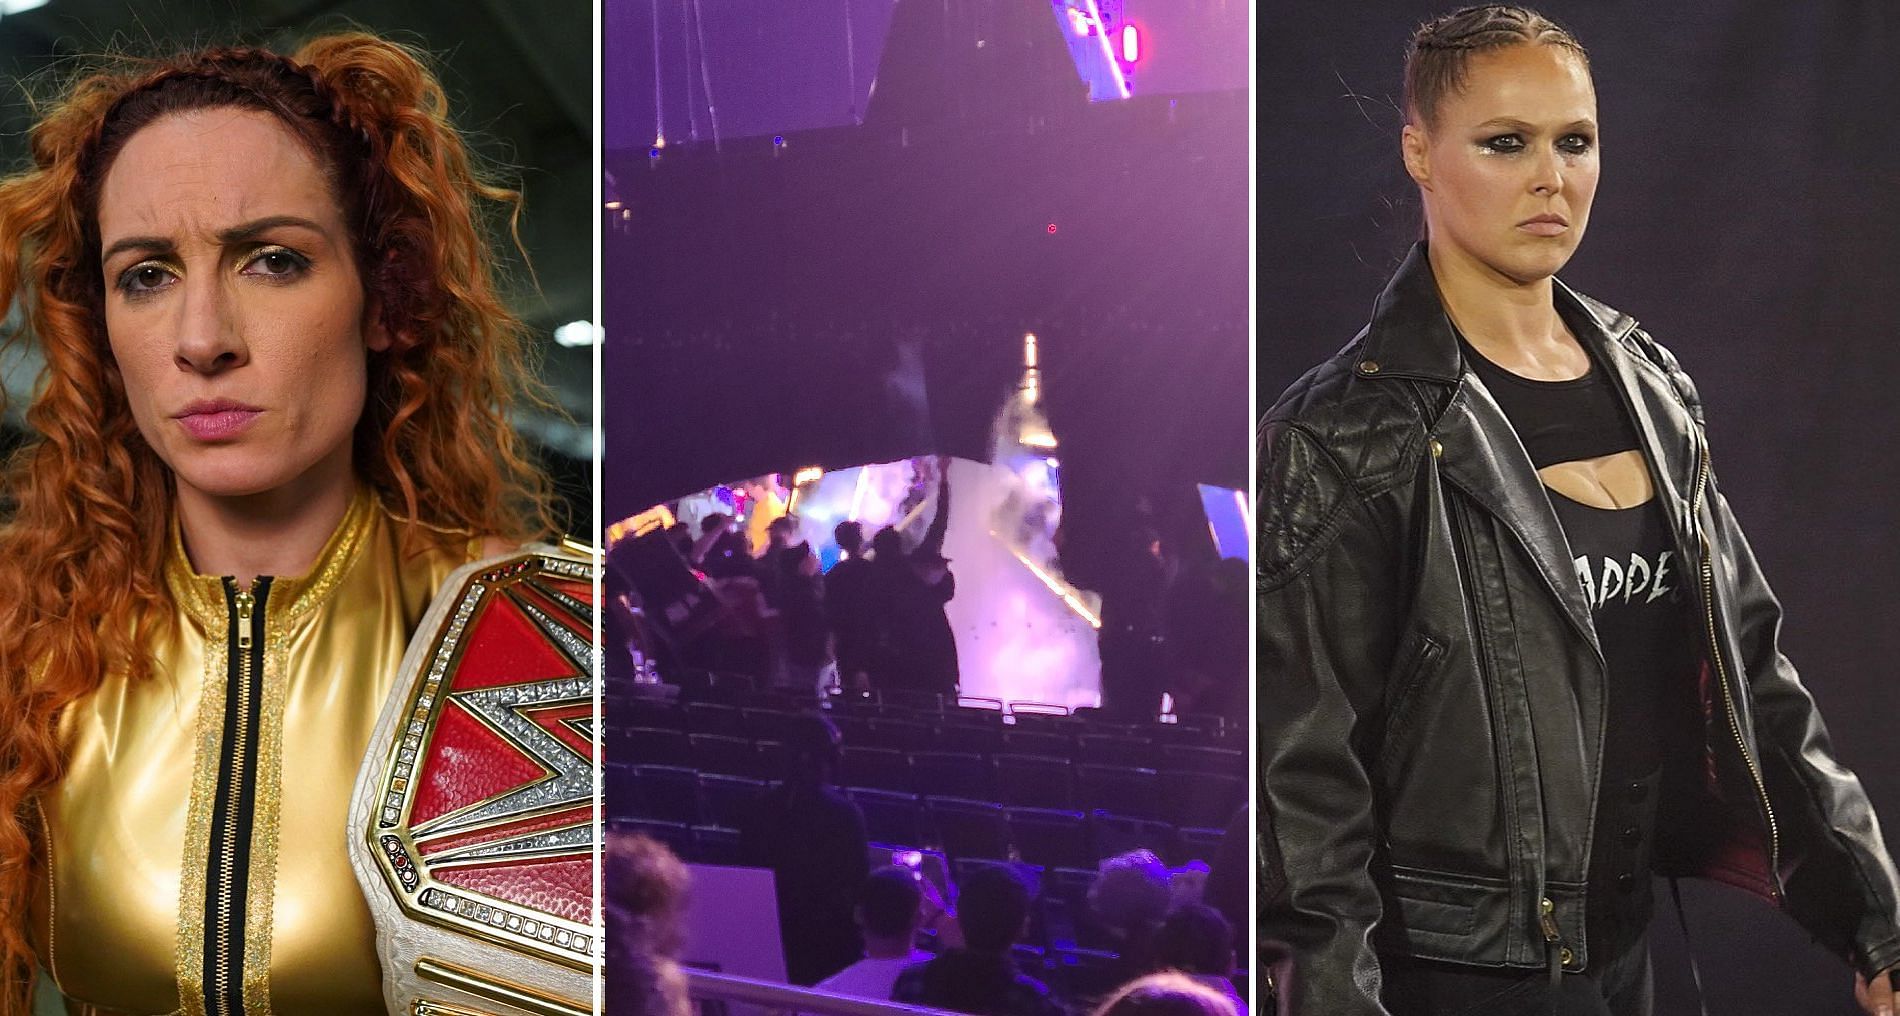 Becky Lynch posted a tweet after the WrestleMania 38 sign caught fire